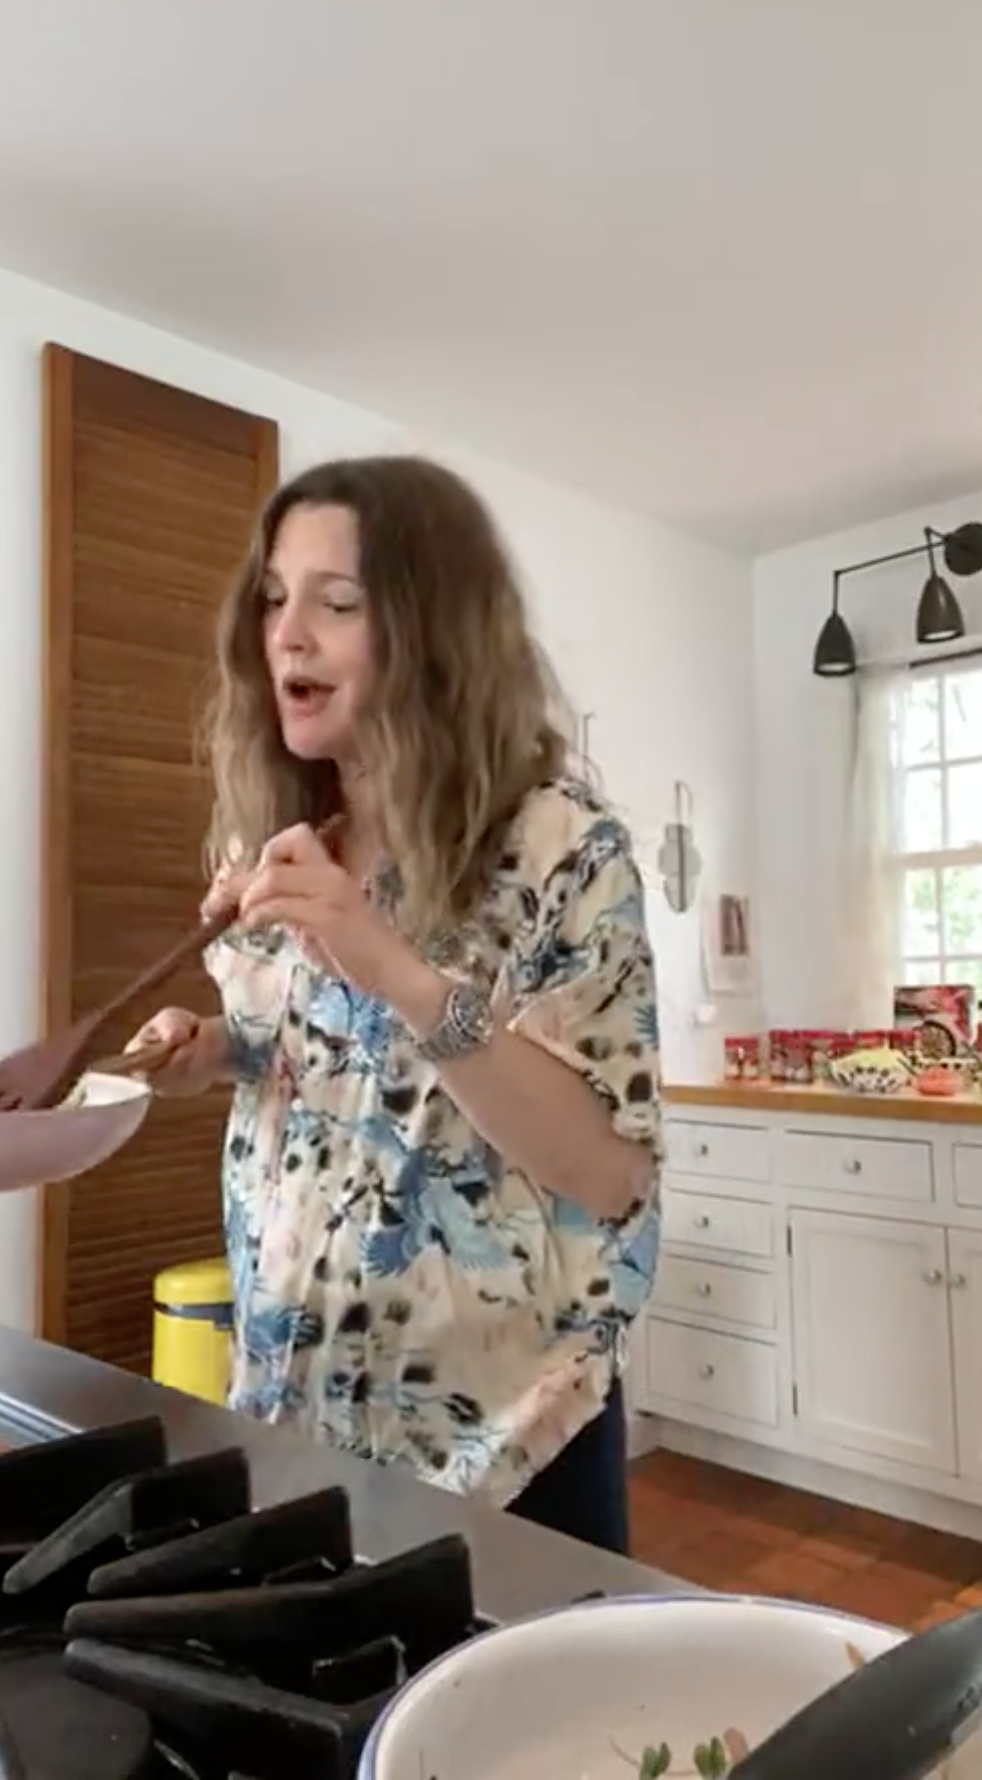 This is the #1 Kitchen Tool Drew Barrymore Can't Live Without